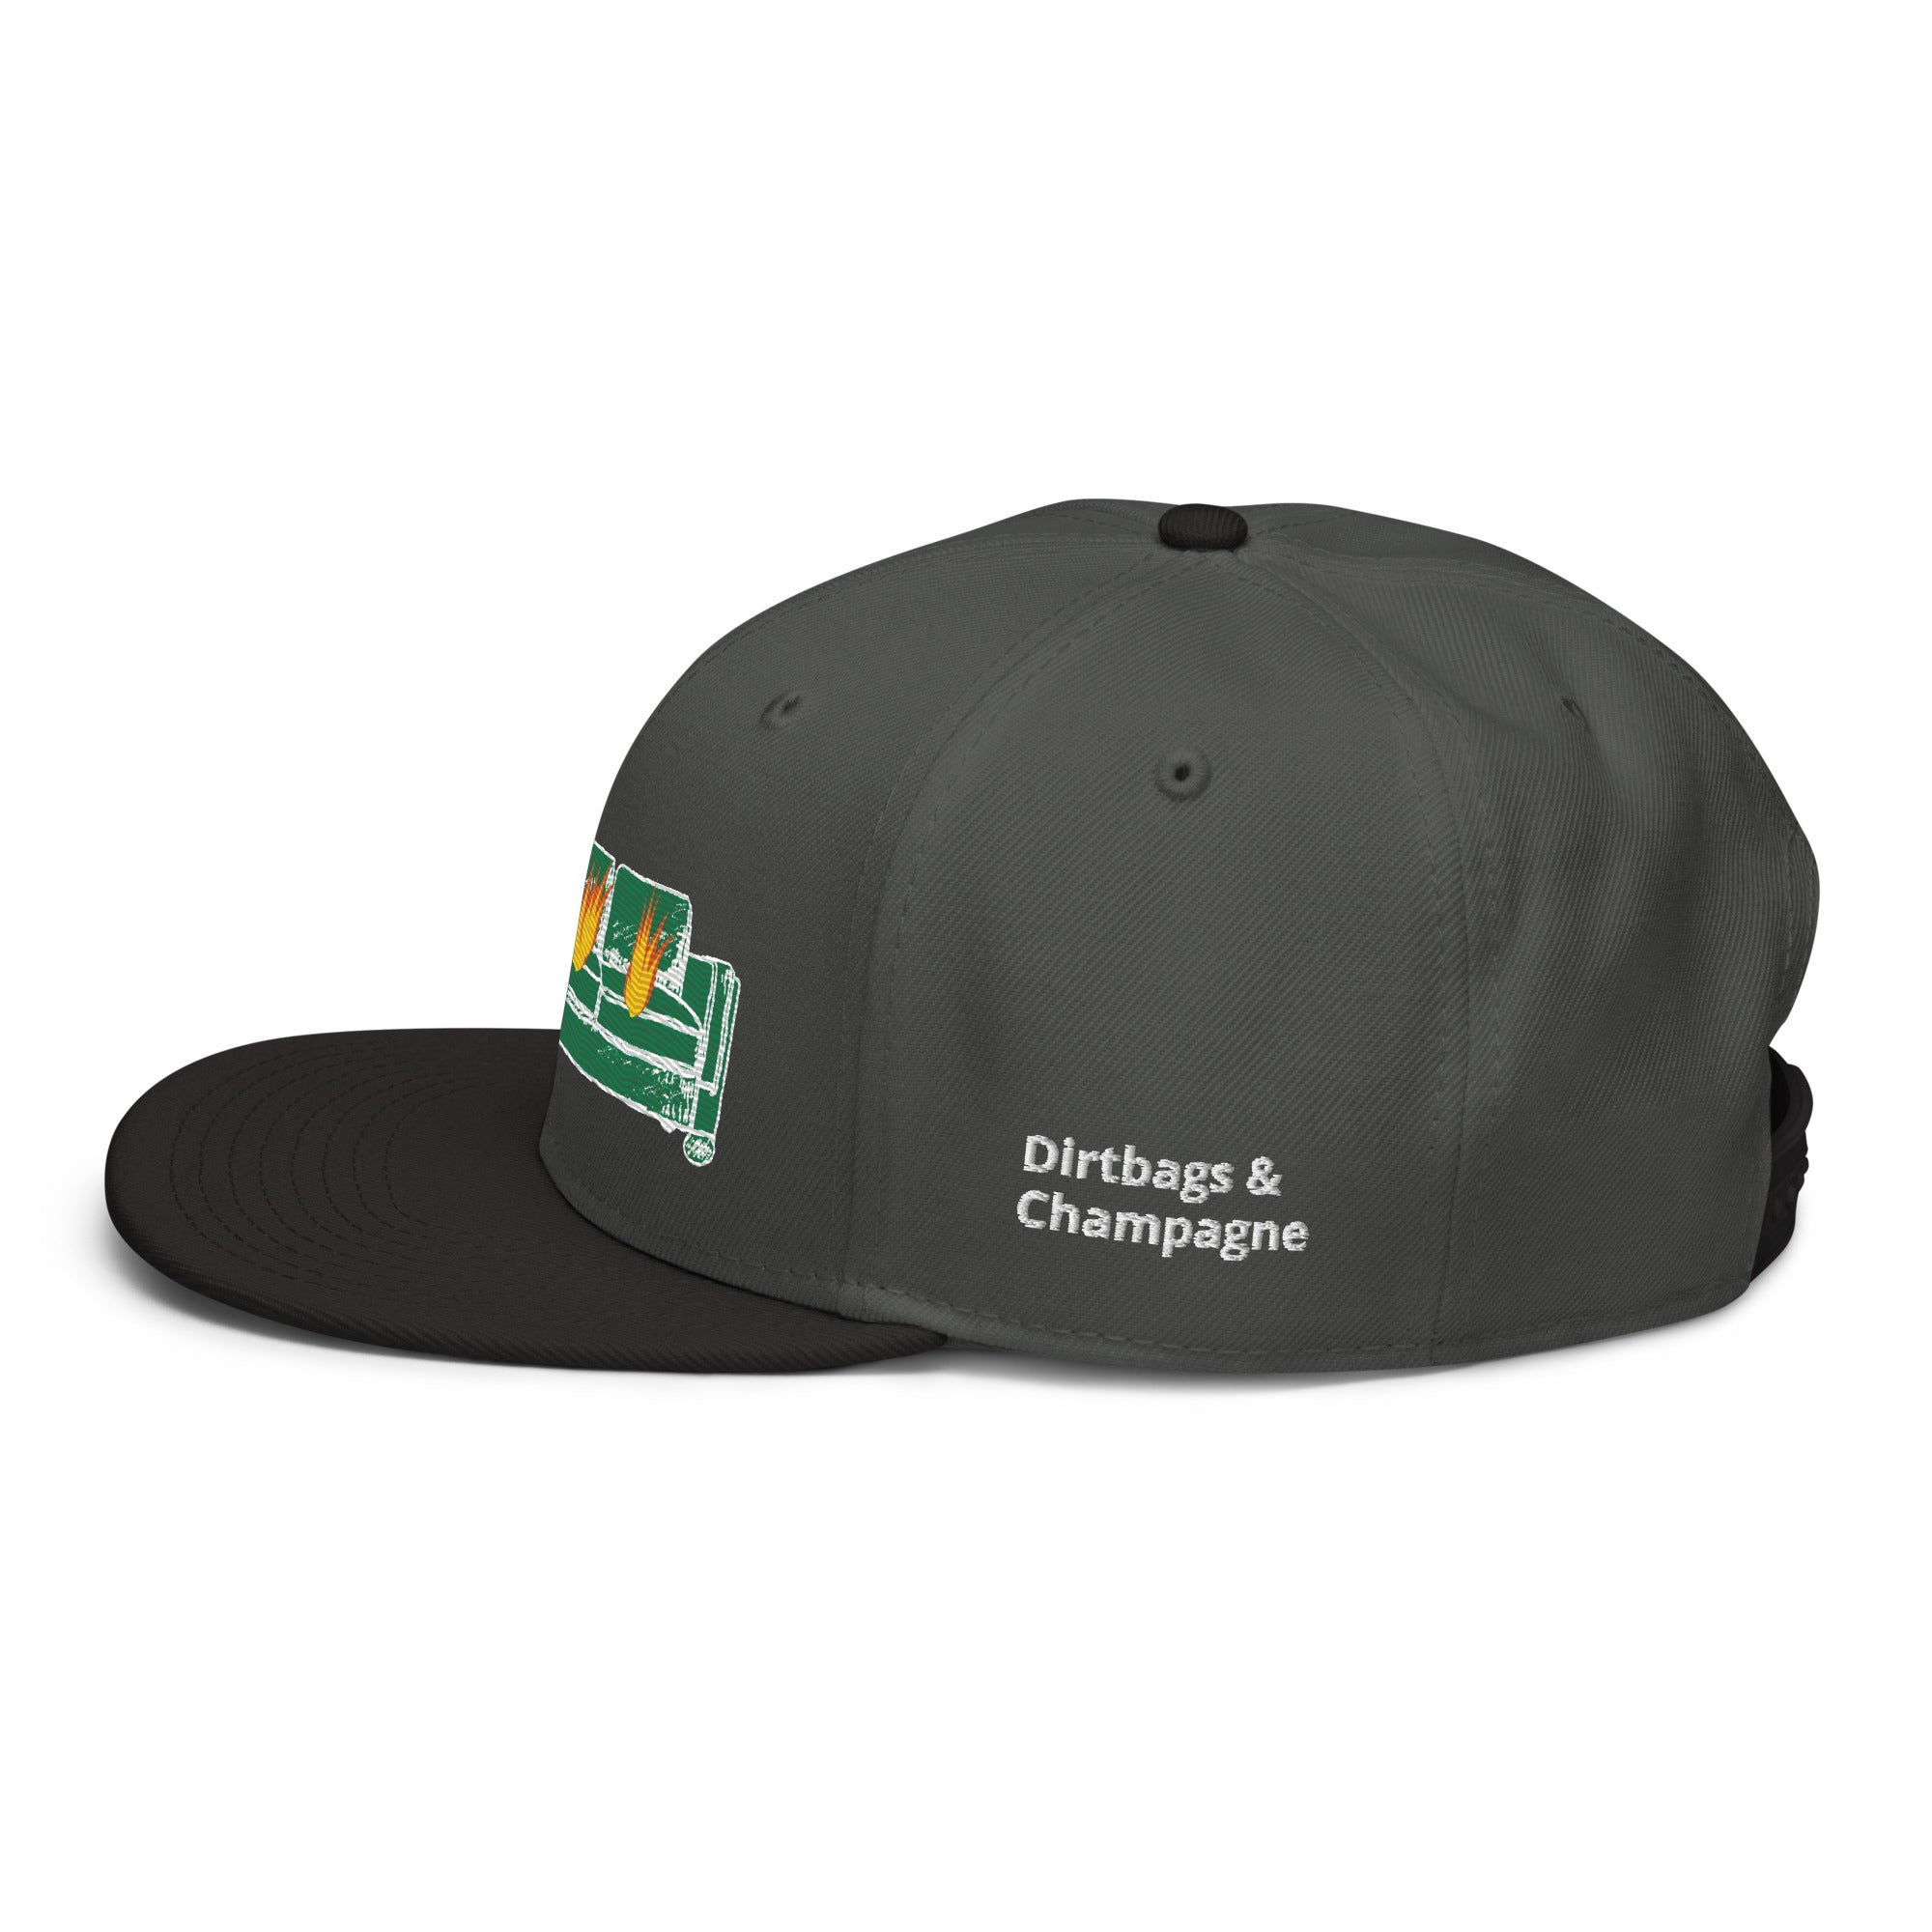 darker green and white couch fire Snapback Hat